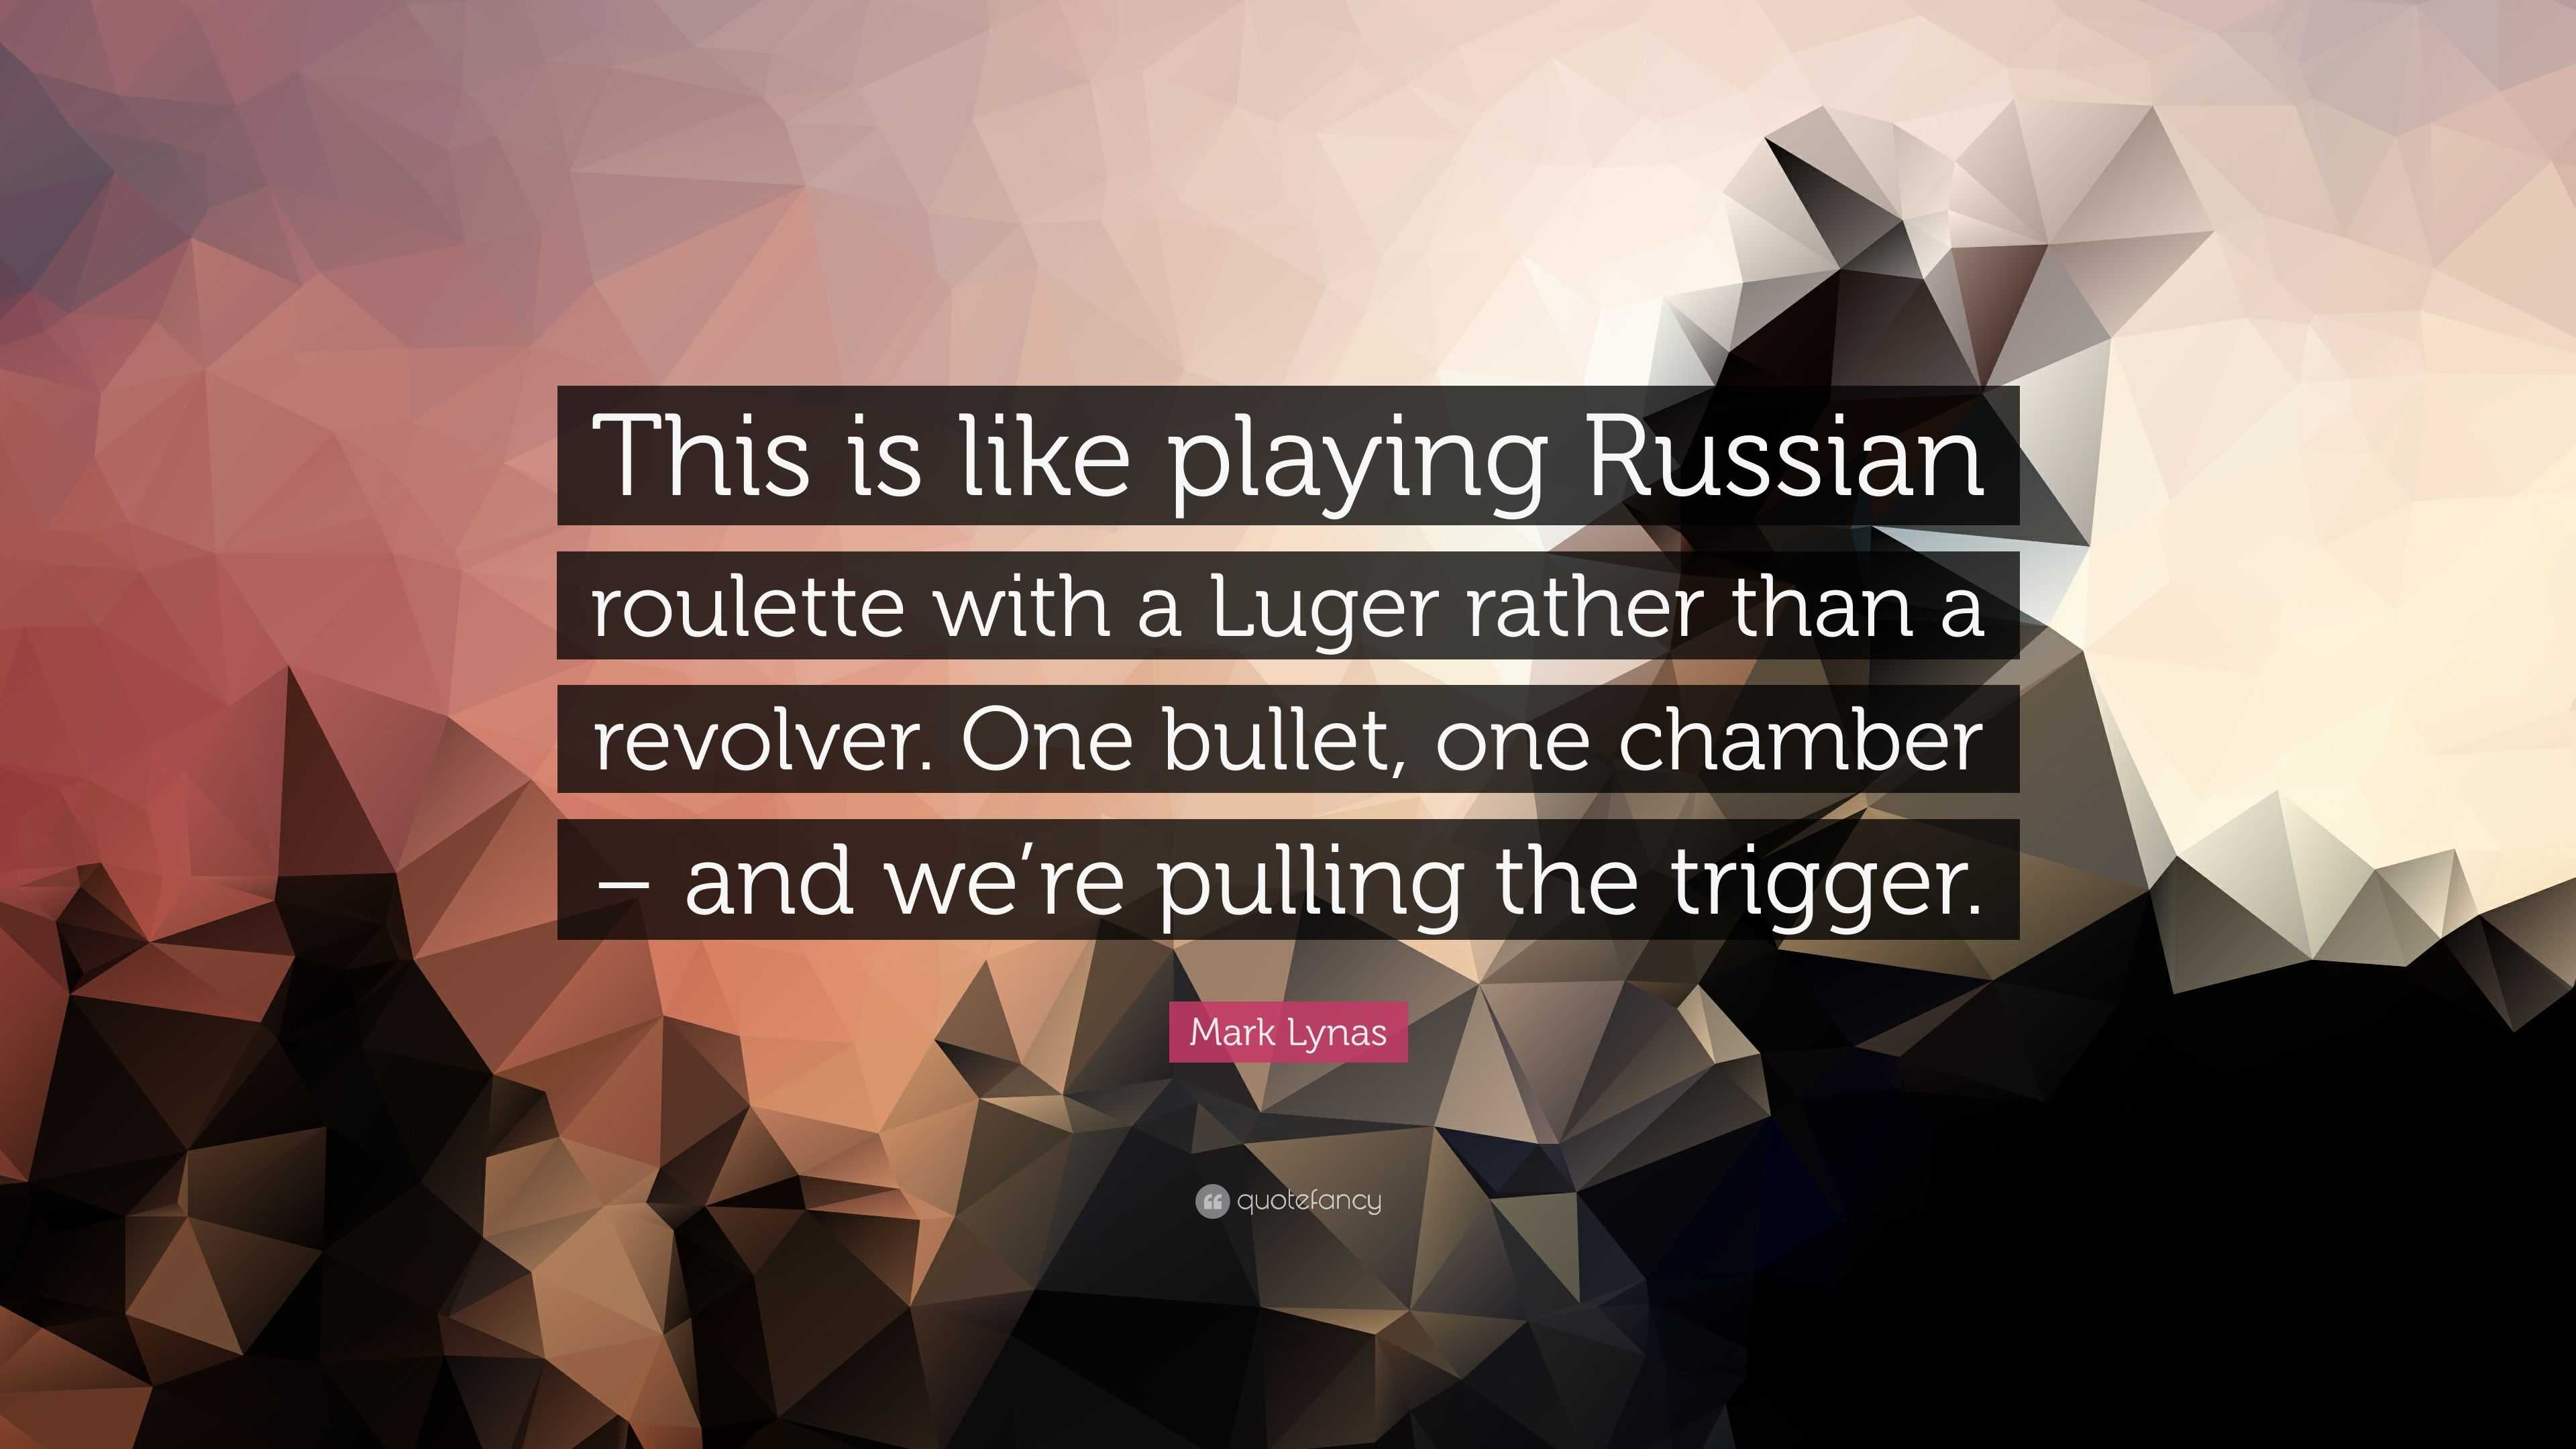 During Russian roulette, when there's only 1 bullet in the revolver and you  spin it, is there no way to tell if you got the bullet vs empty? Is there  no sound